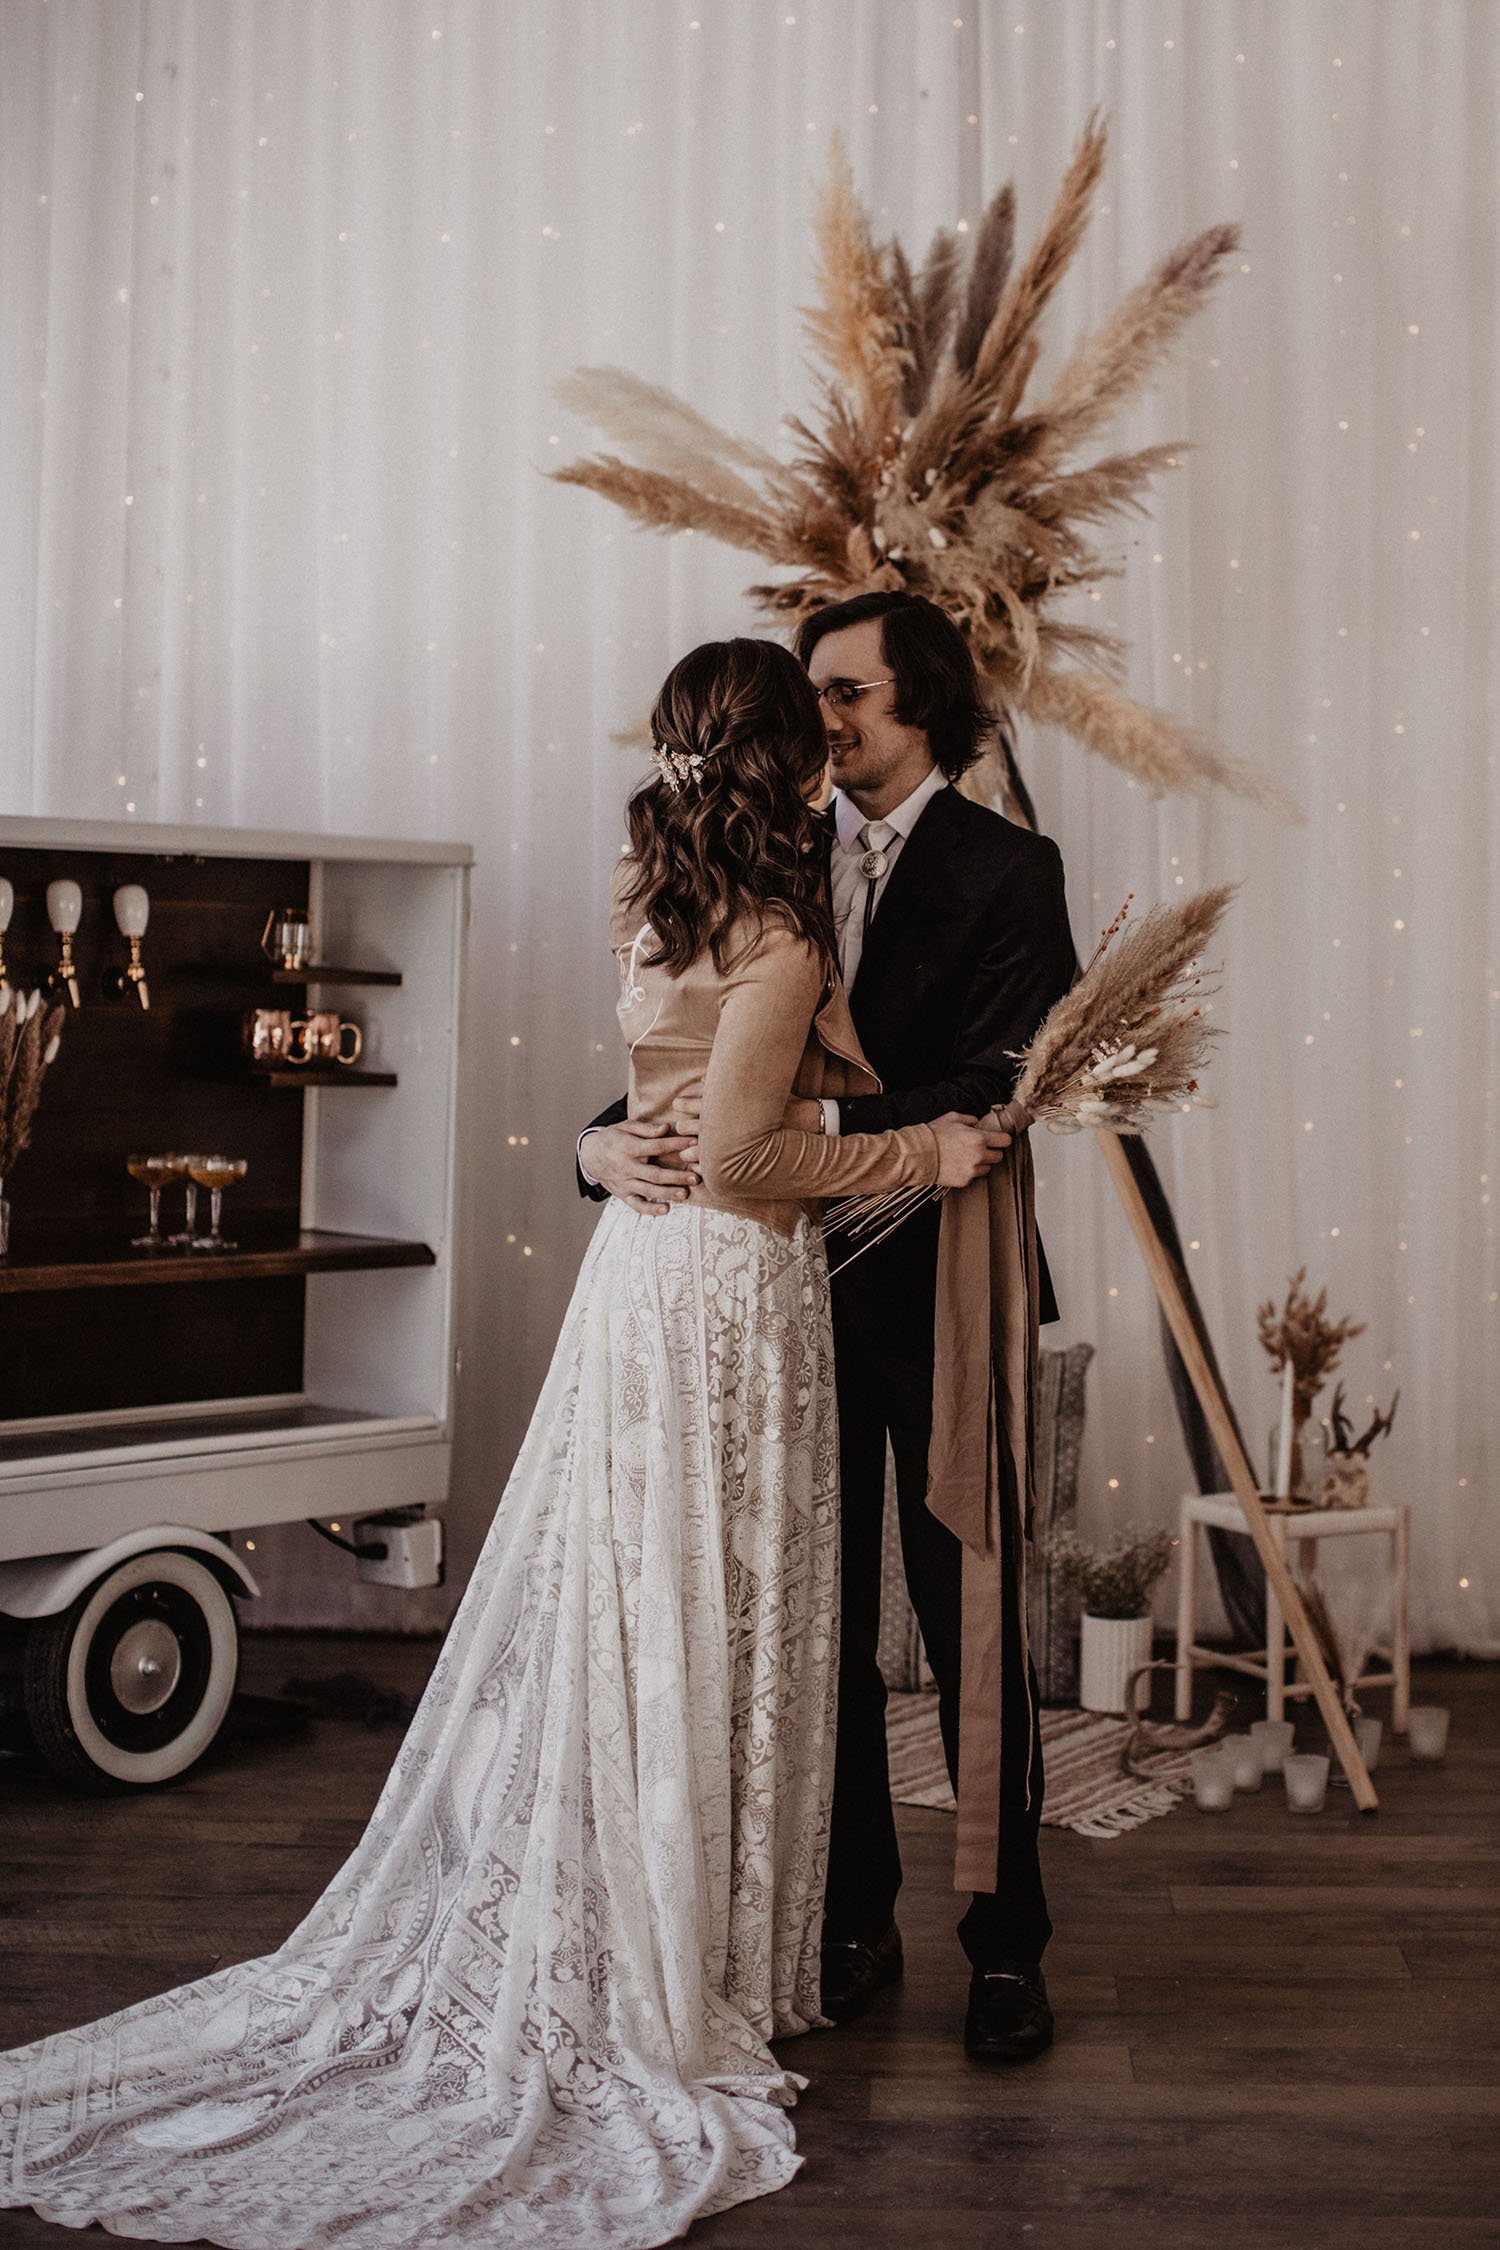  A bride wearing the Rue de Seine kyara wedding dress with a brown leather jacket holding a bridal bouquet of dried florals. She is standing facing her groom with their arms around each others waist. They are standing in front of a boho wearing arbor